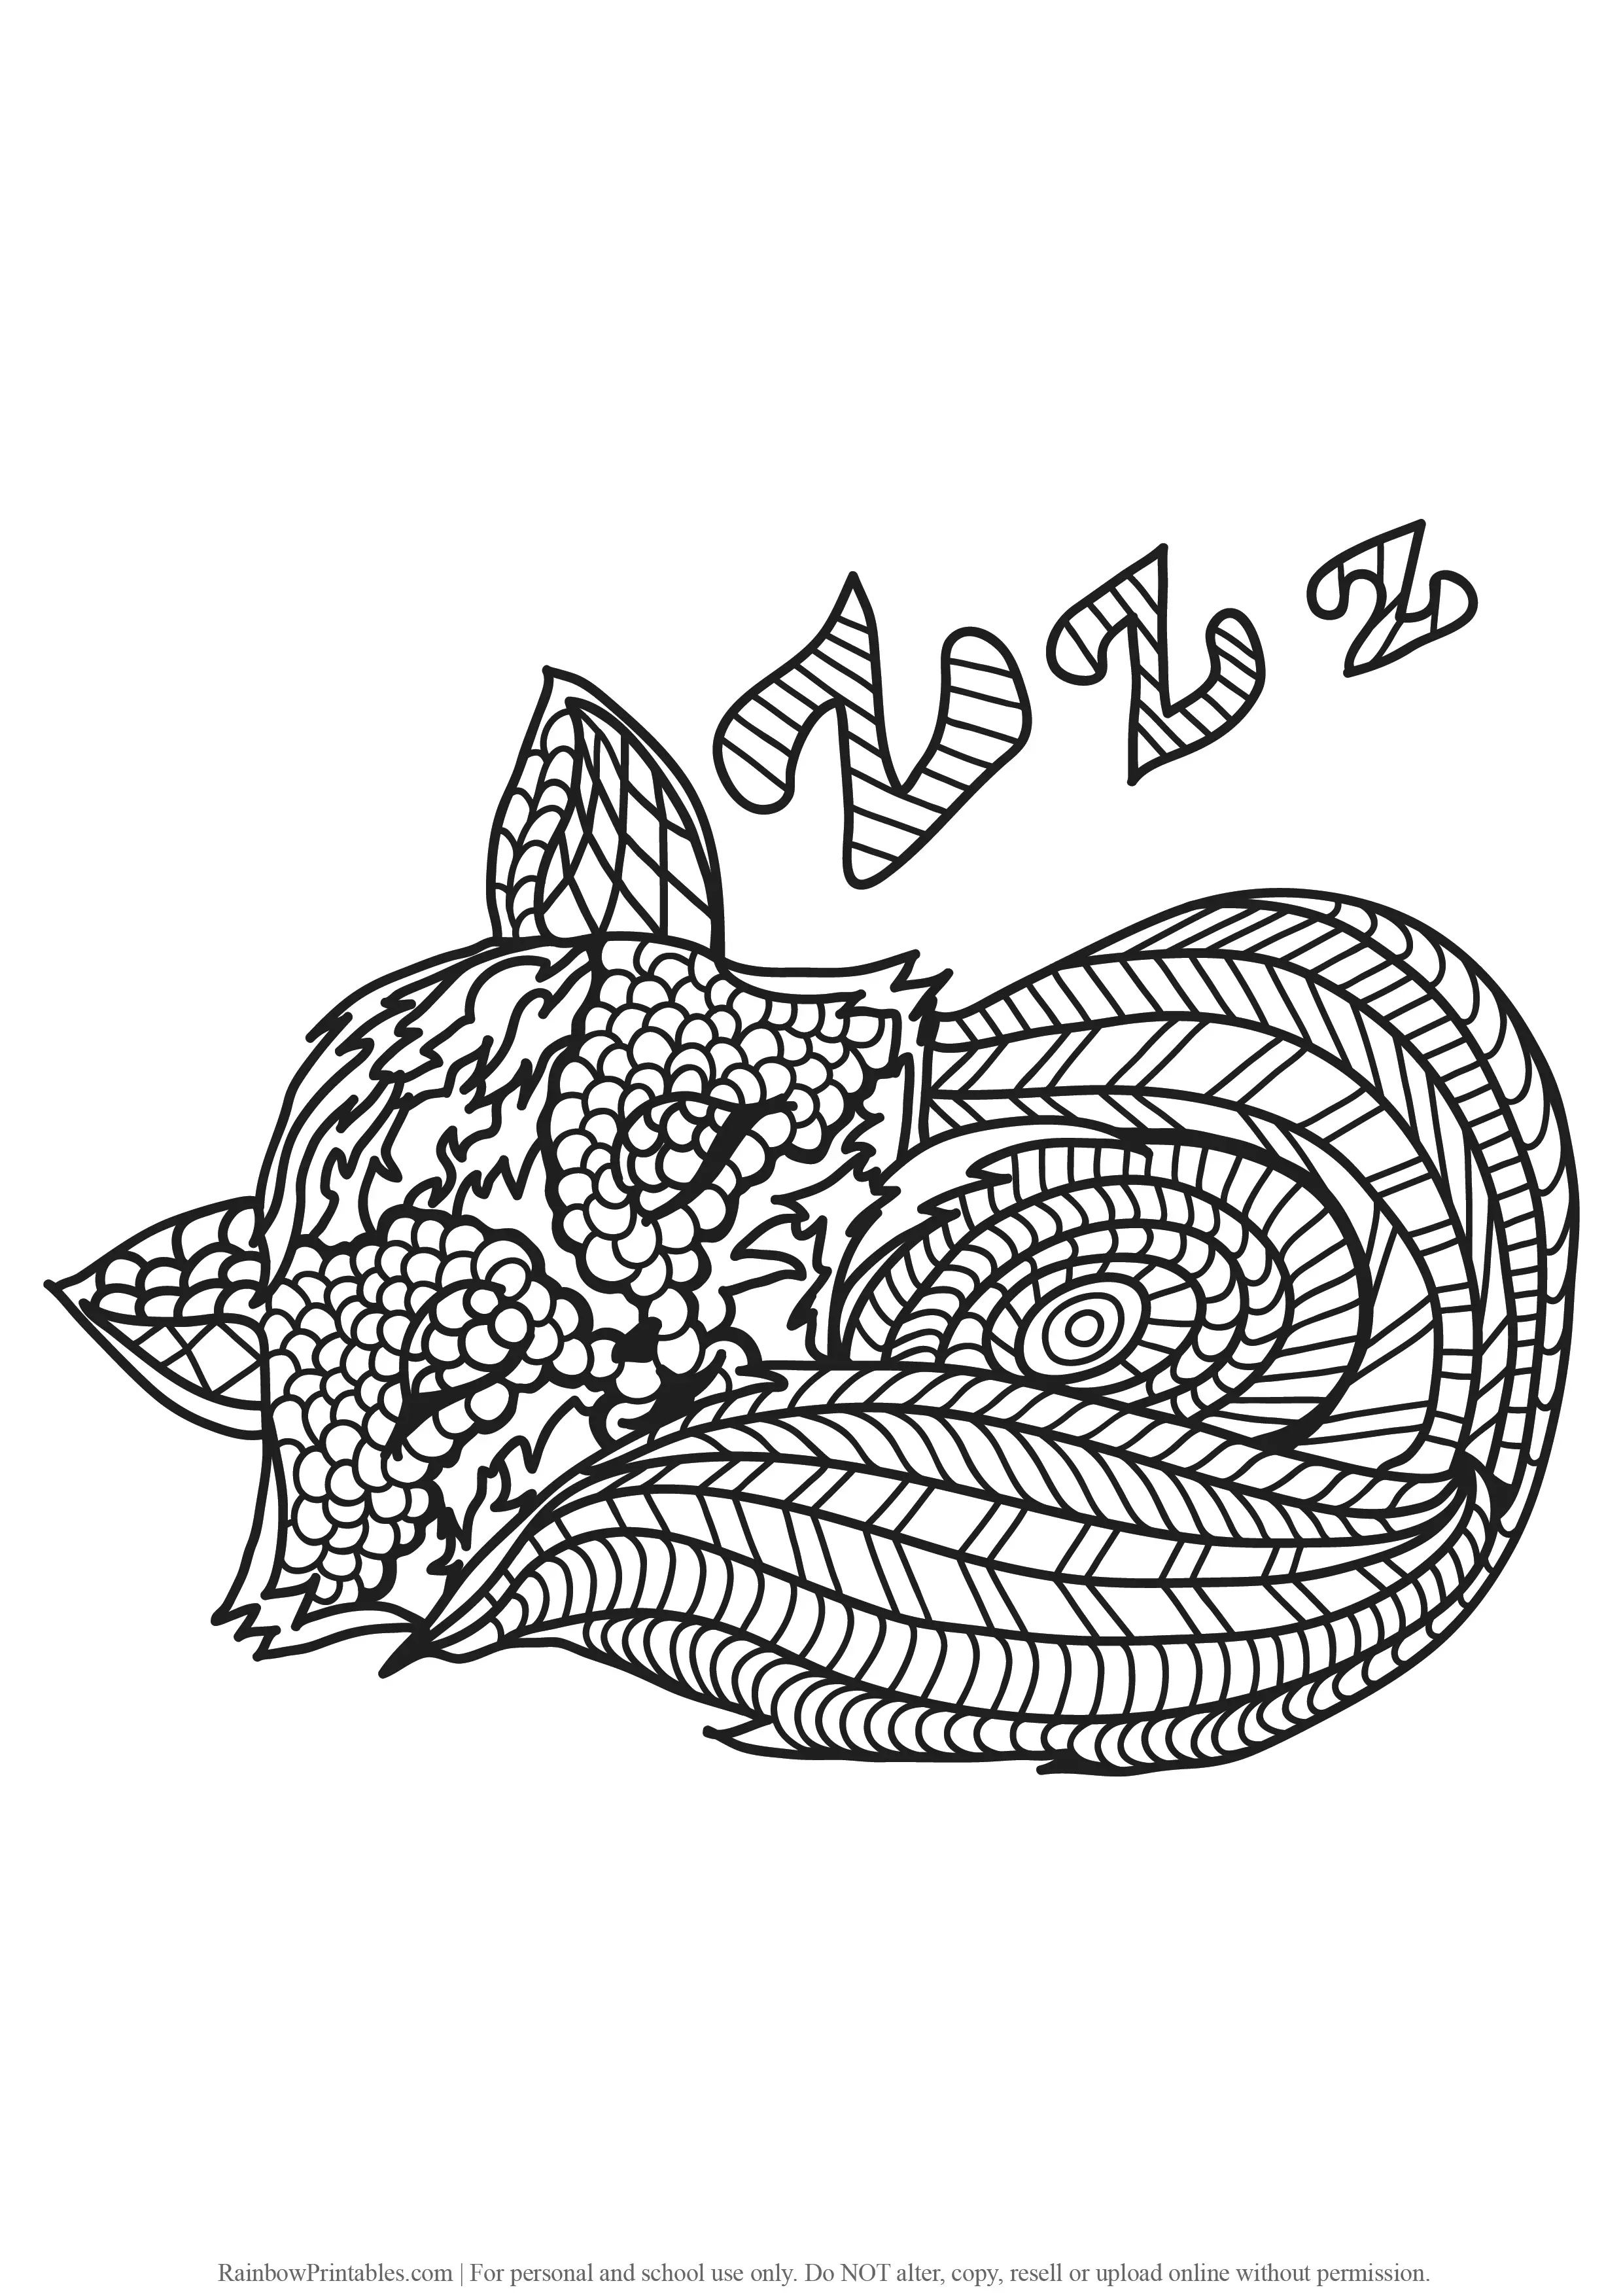 Mosaic Cat Coloring Pages - Rainbow Printables